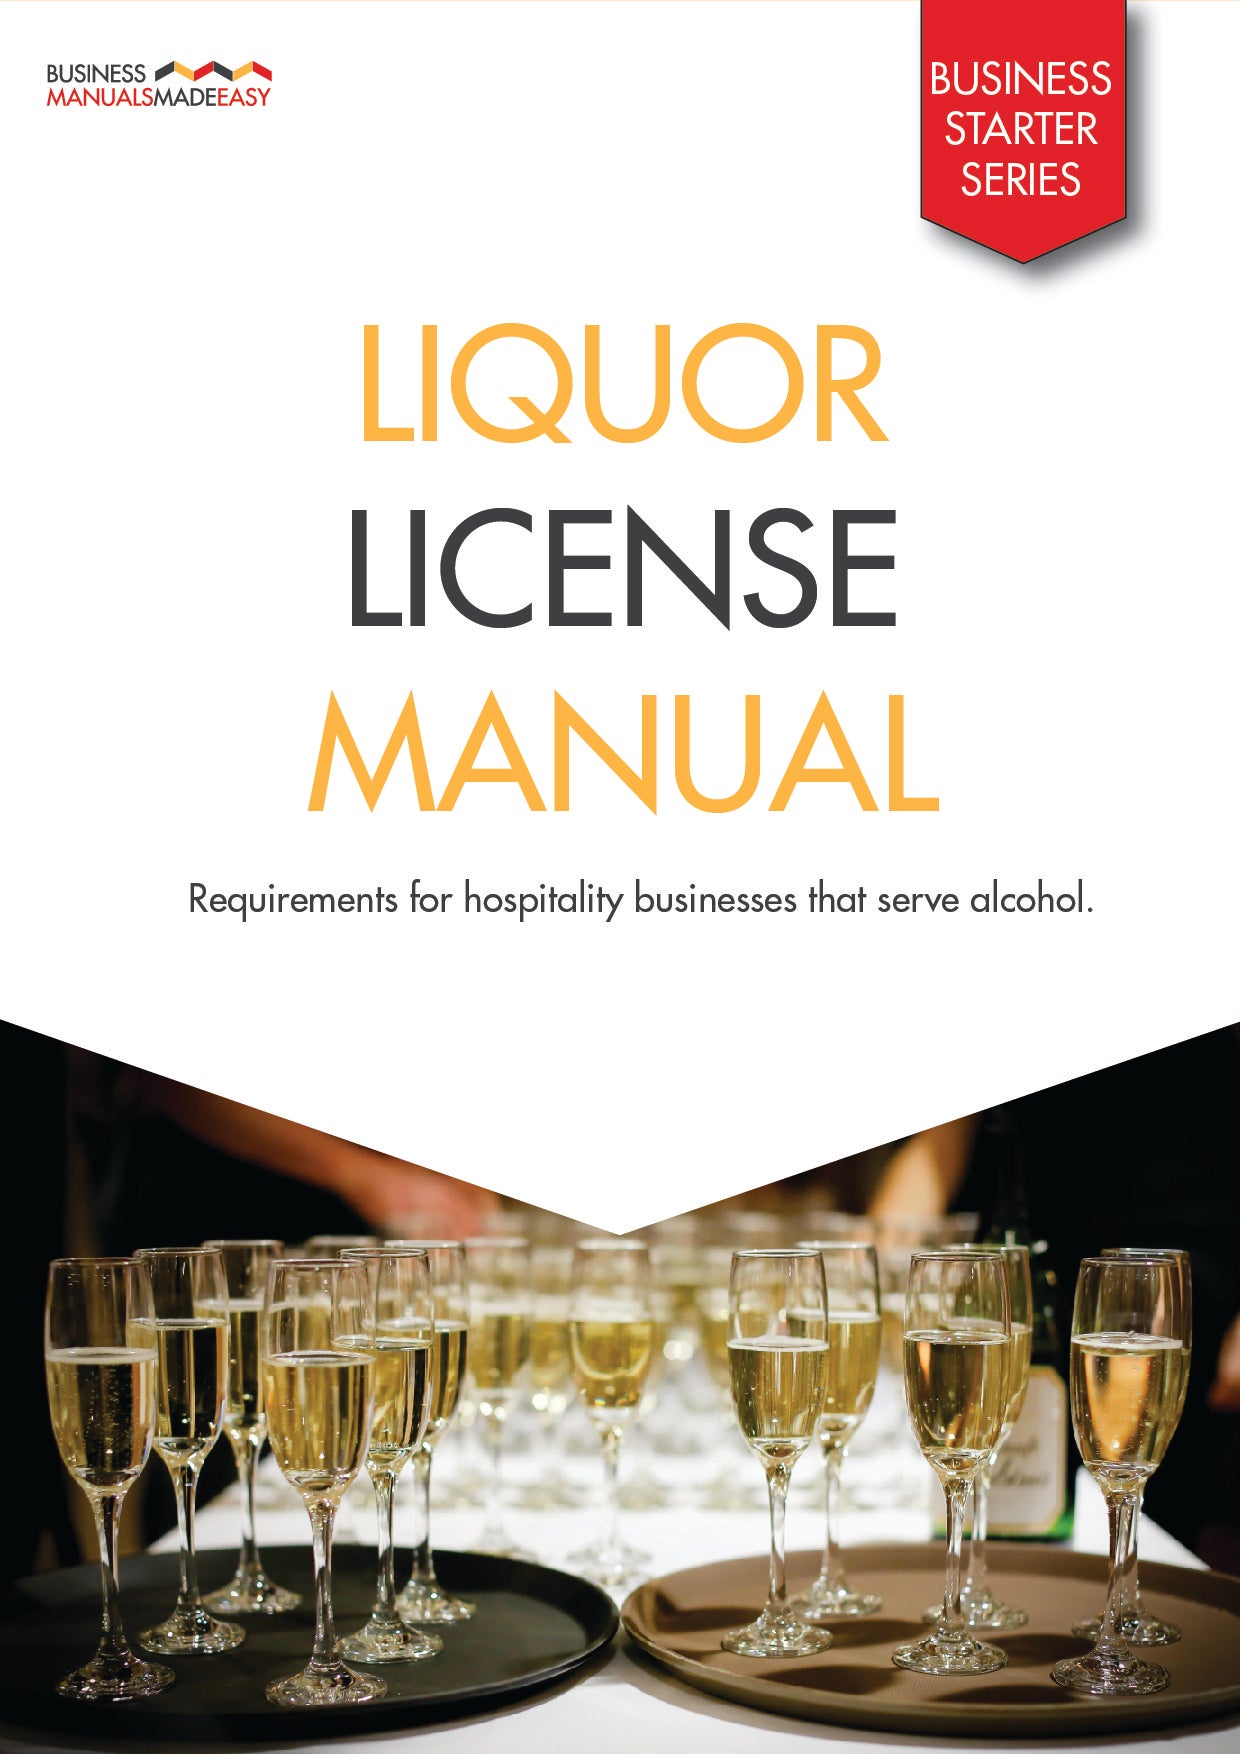 Business Manuals Made Easy: Liquor Licence Manual. This manual includes every requirement to comply with RSA (Responsible Service of Alcohol) training and is a good support and risk reduction for your Liquor Licence.